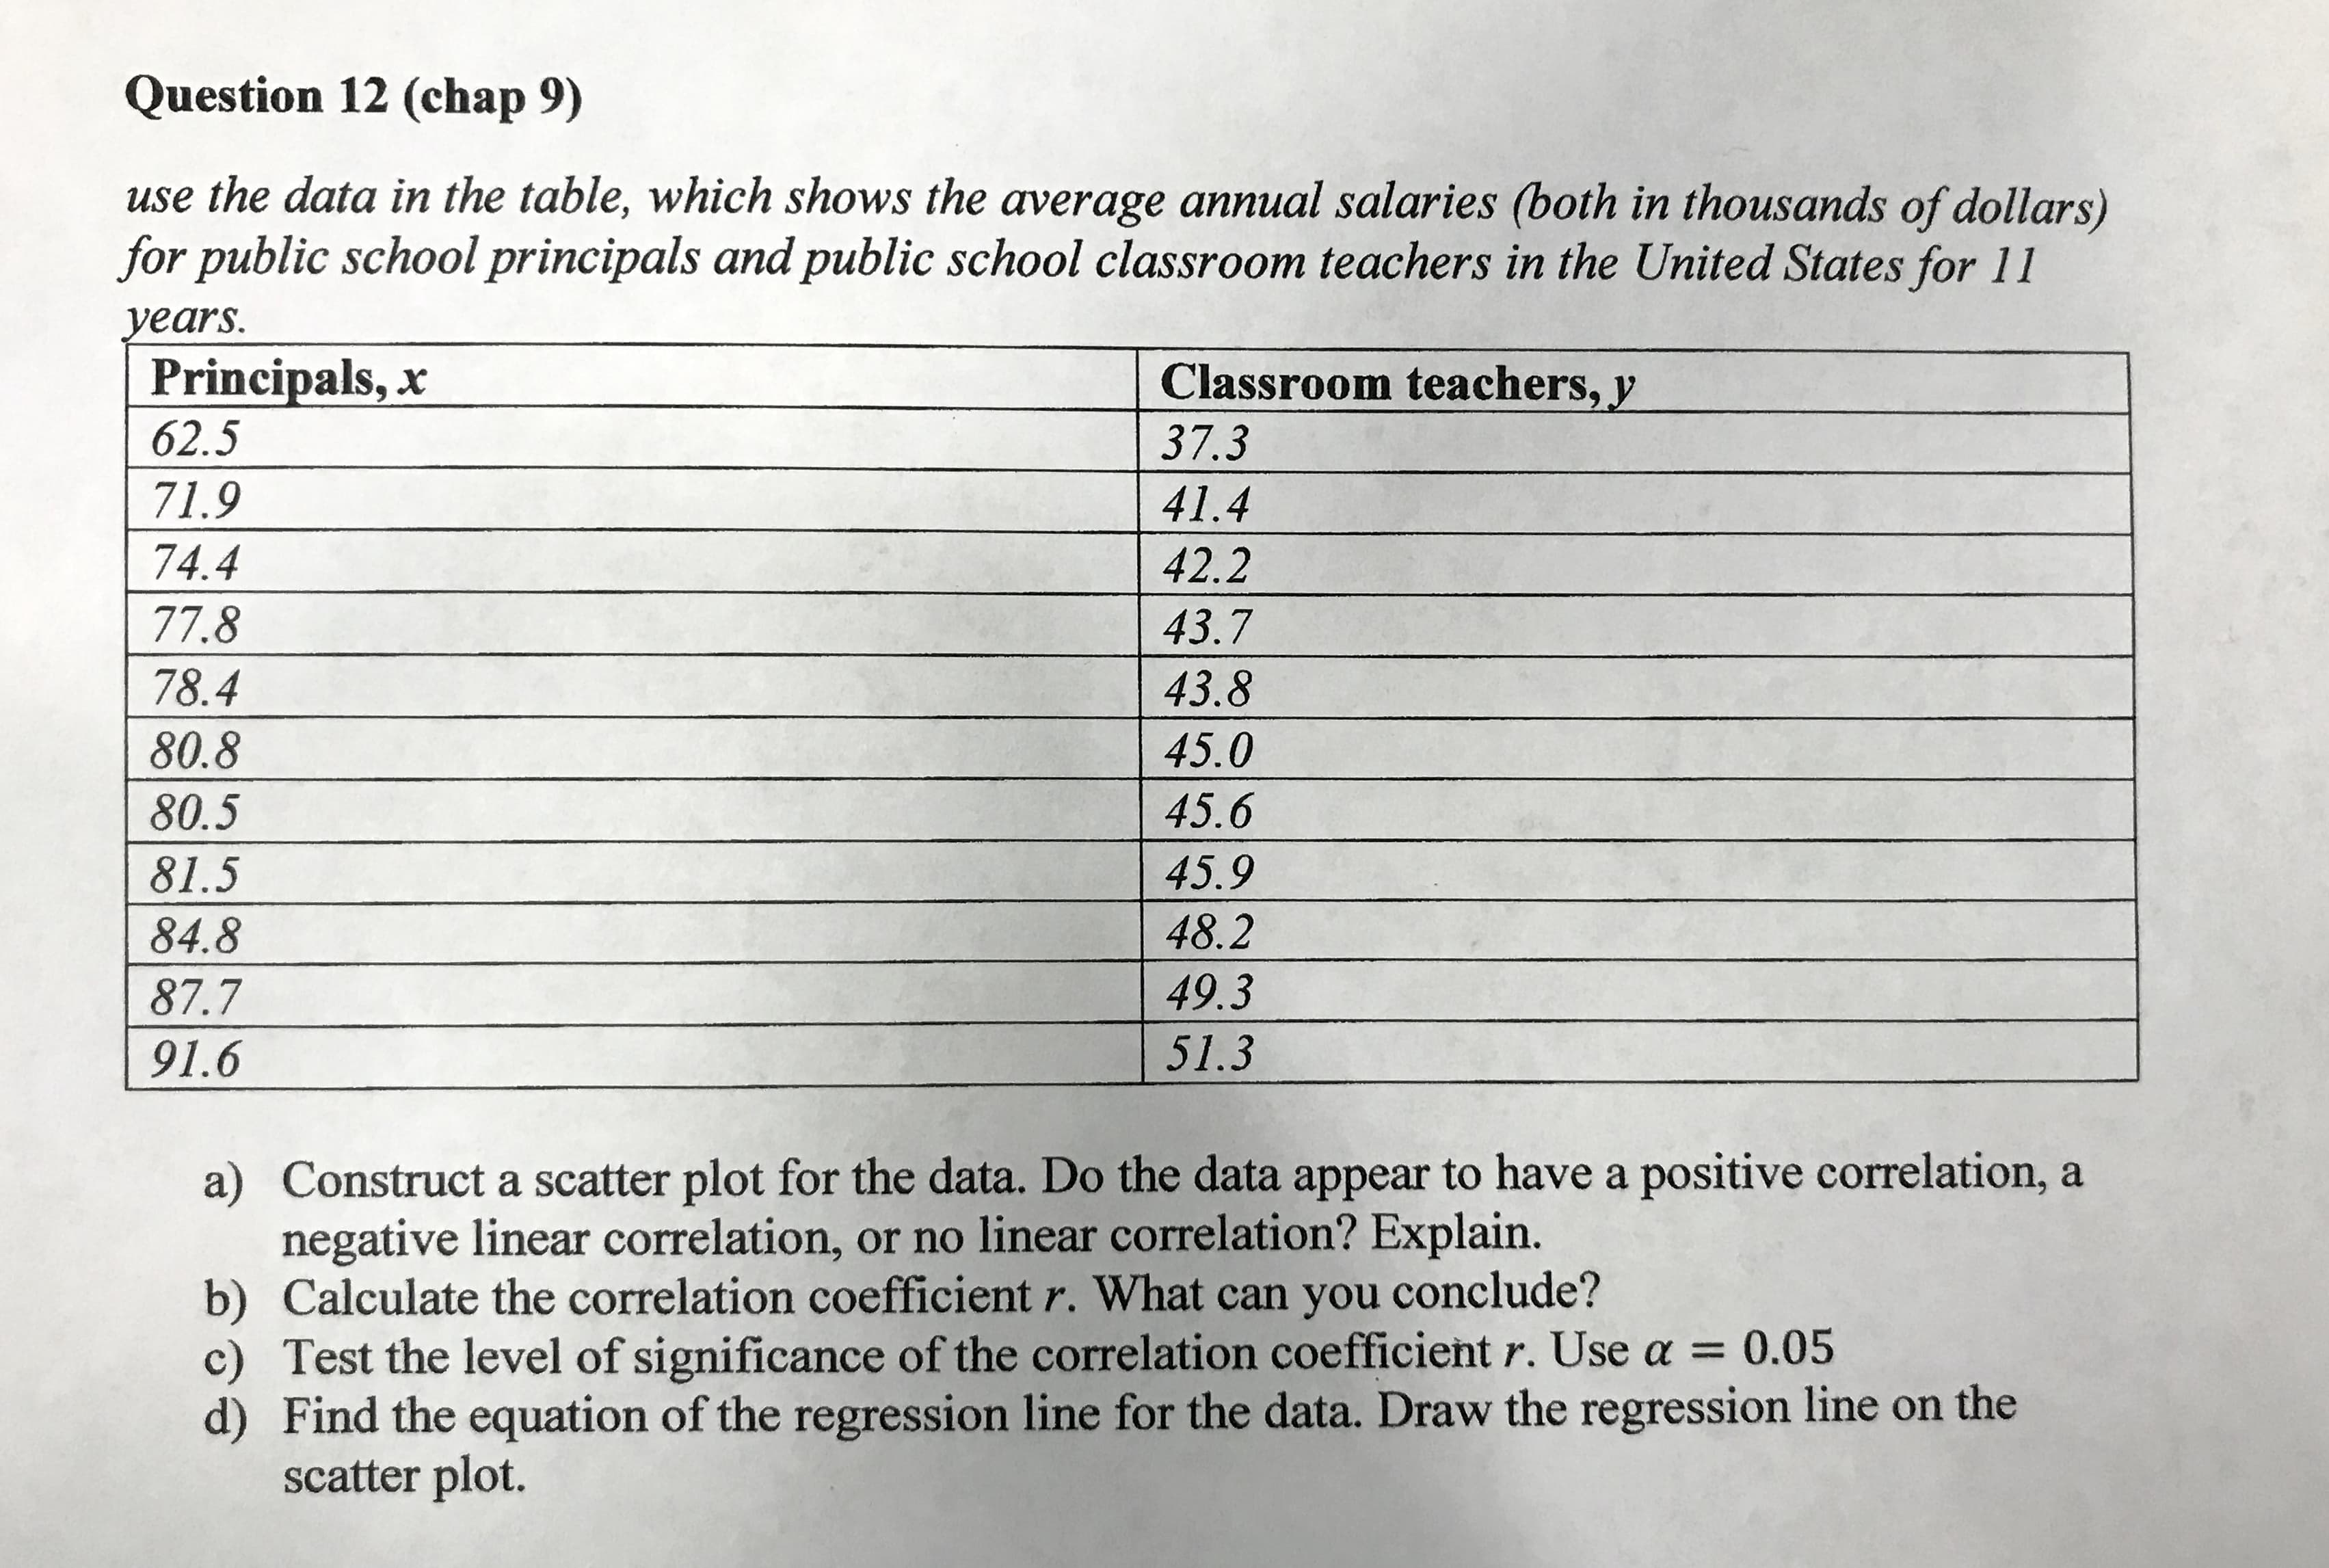 a) Construct a scatter plot for the data. Do the data appear to have a positive correlation, a
negative linear correlation, or no linear correlation? Explain.
b) Calculate the correlation coefficient r. What can you conclude?
c) Test the level of significance of the correlation coefficient r. Use a = 0.05
